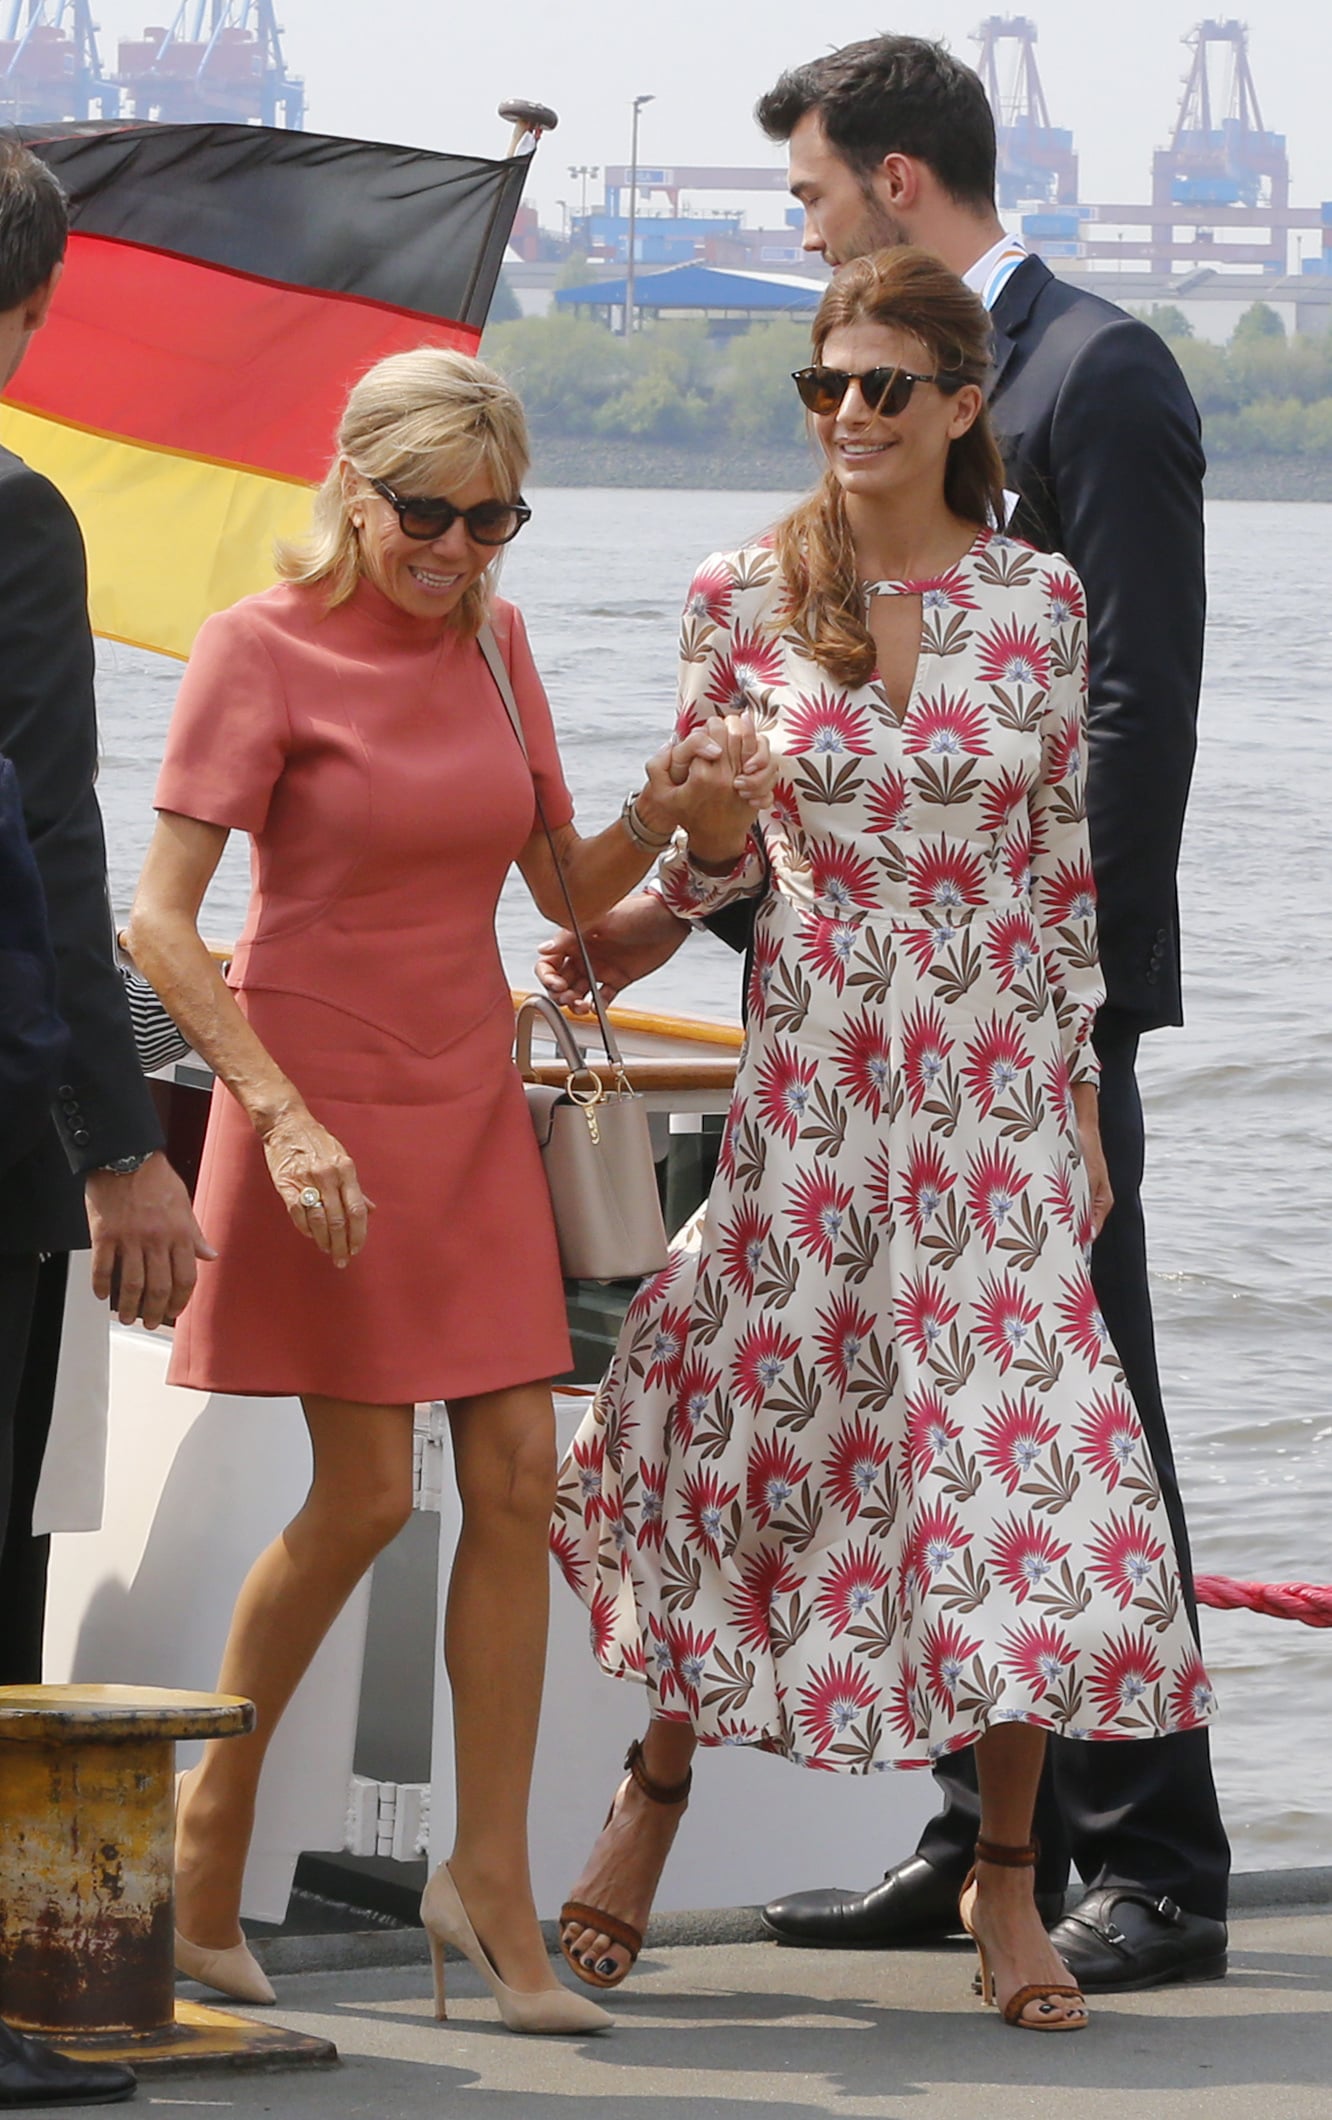 Brigitte Macron's style in office: 36 images charting French first lady's  fashion